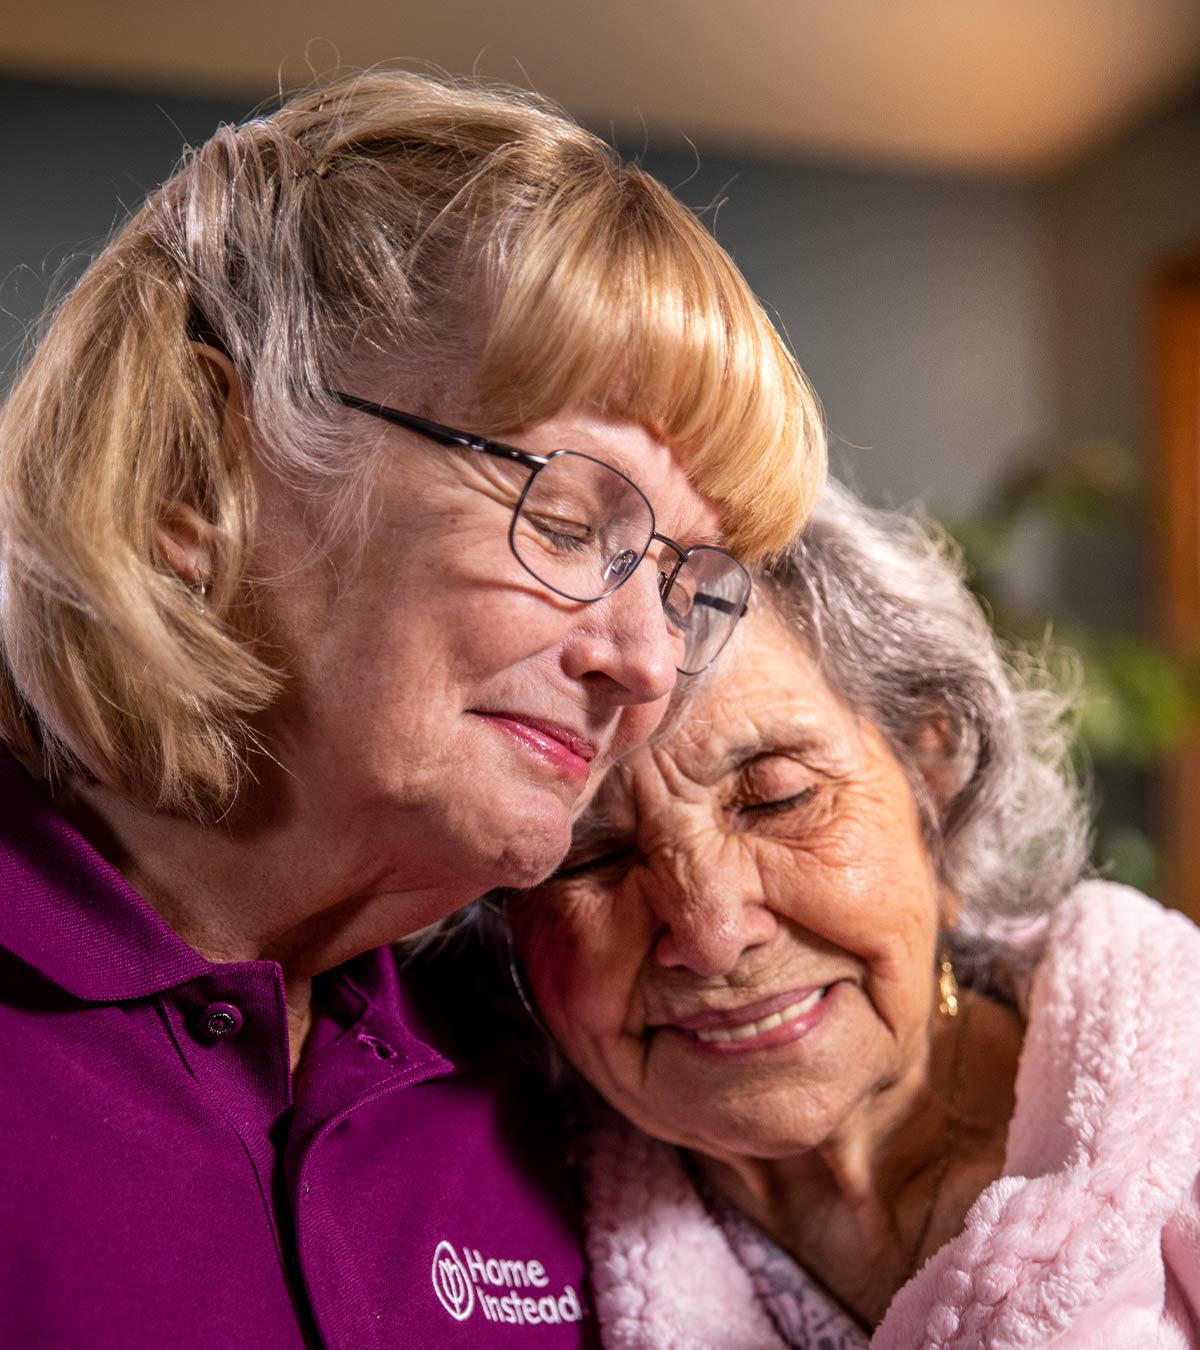 CAREGiver providing in-home senior care services. Home Instead of Beaverton, OR provides Elder Care to aging adults. 